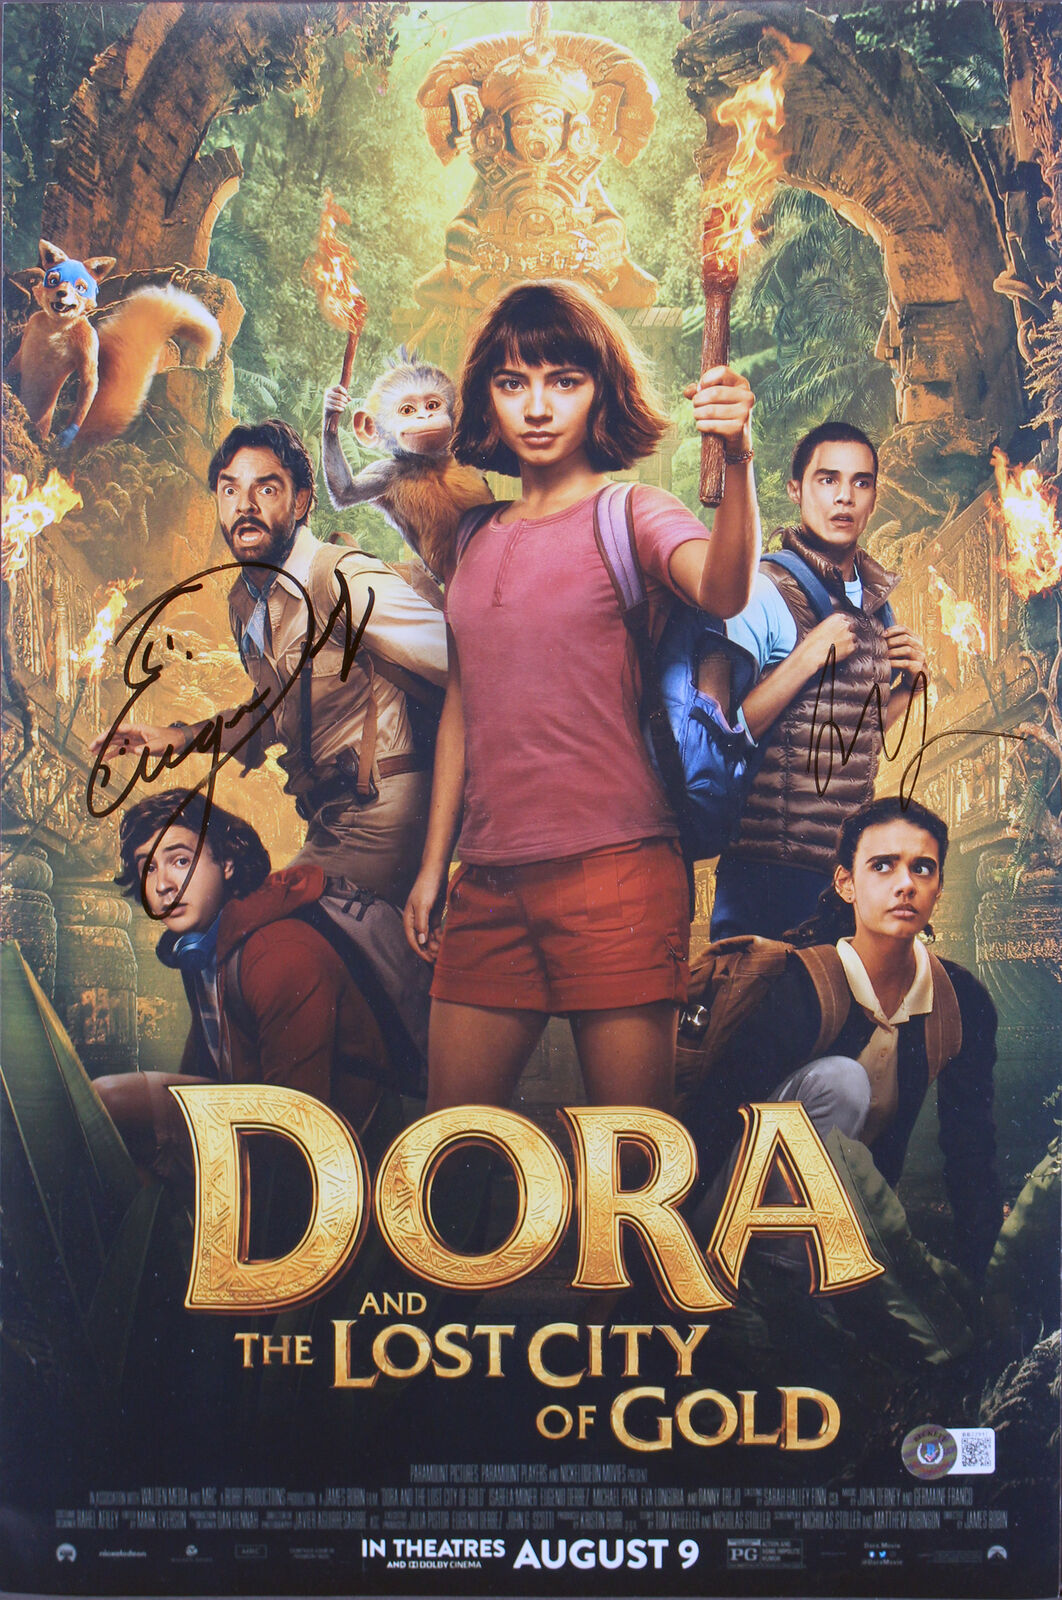 (2) Derbez & Wahlberg Dora And The Lost City Of Gold Signed 12x18 Photo Poster painting BAS